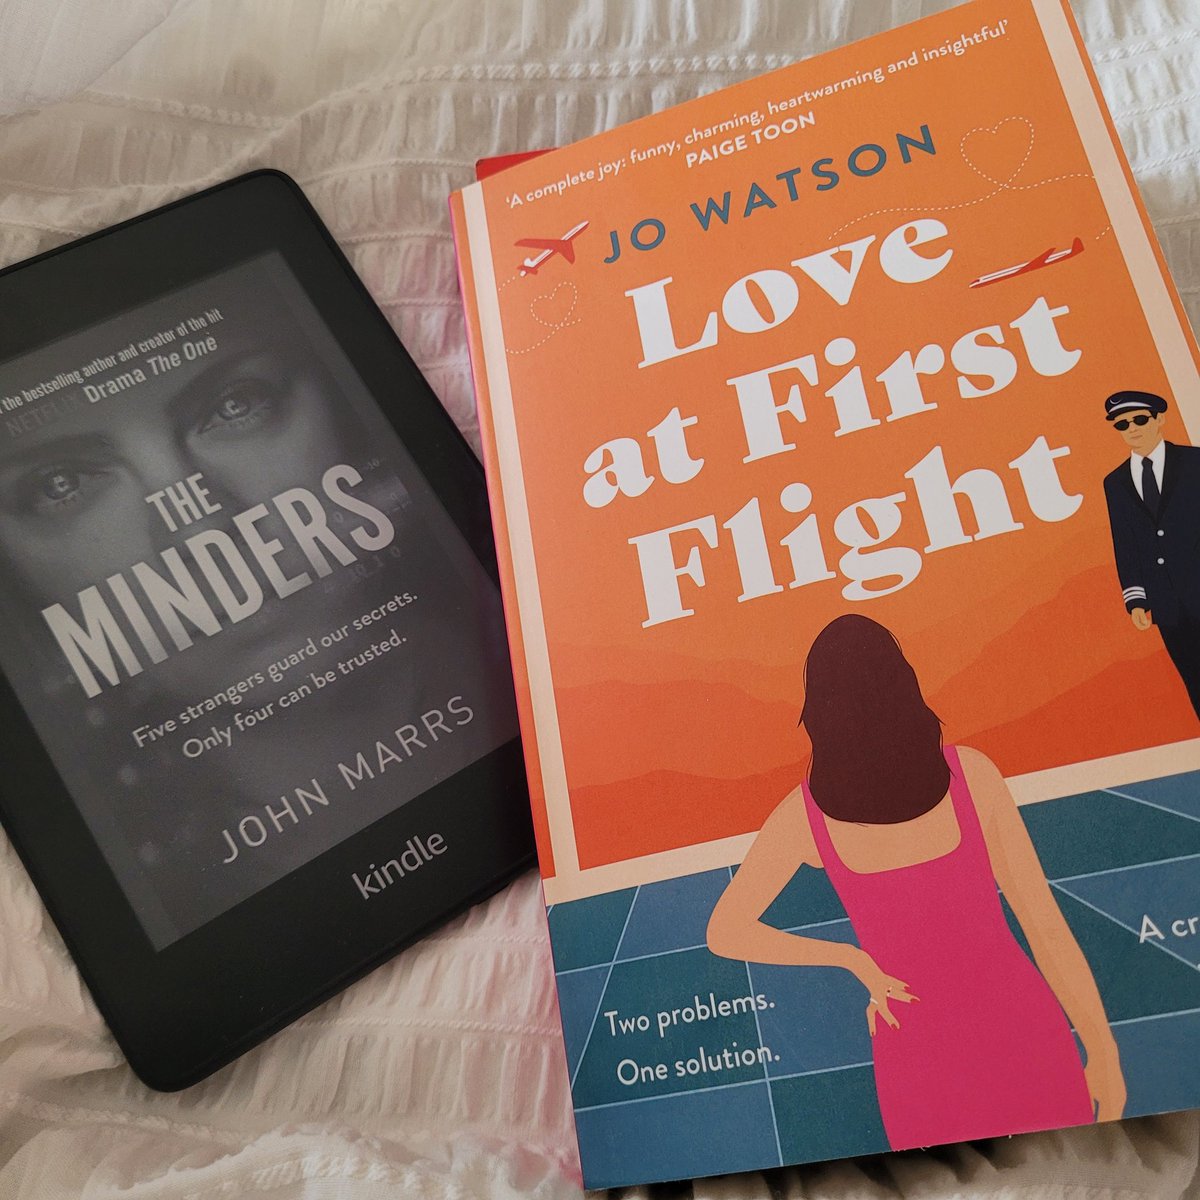 Currently Reading... Physical - Love at First Flight by Jo Watson @eternal_books Kindle - The Minders by John Marrs @panmacmillan #CurrentlyReading #booktwt